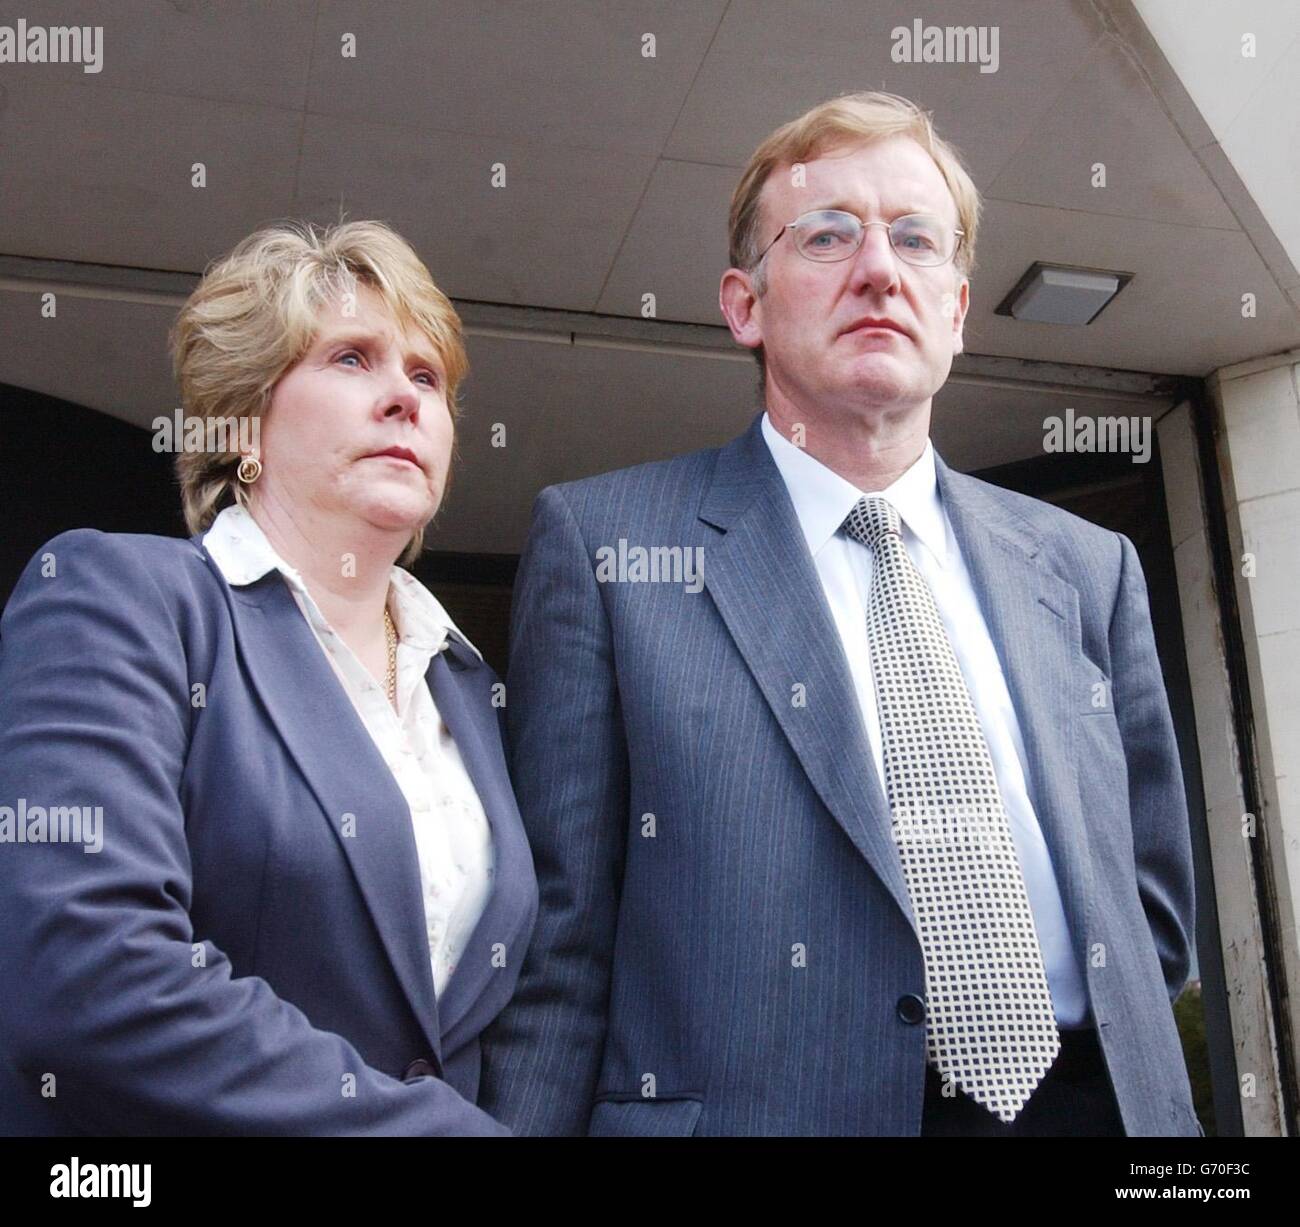 Consultant anaesthetist Robert Falconer, 45, with his wife outside Swansea Crown Court after being cleared by a jury of the manslaughter of a six-week-old baby boy. Dr Falconer walked free from court in tears after the week-long trial, where he admitted injecting air directly into the bloodstream of baby Aaron Havard during a routine operation to rectify a problem of thickening of the stomach wall at Singleton Hospital, Swansea, in April 2002. The jury found that the fatal error did not constitute gross negligence. Stock Photo